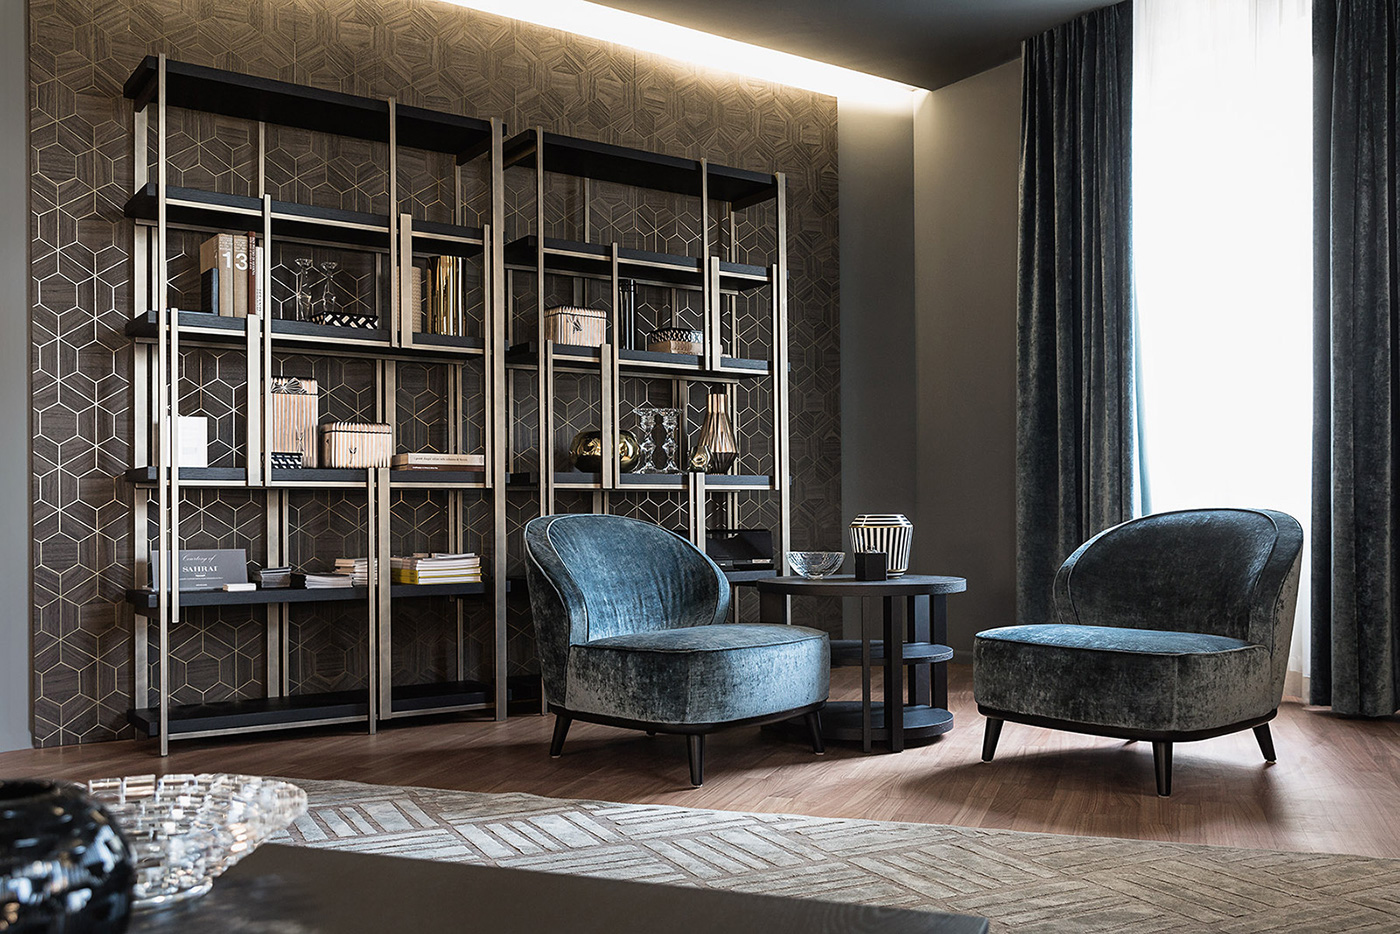 casamilano showroom design elegance Style home Interior made in italy furniture